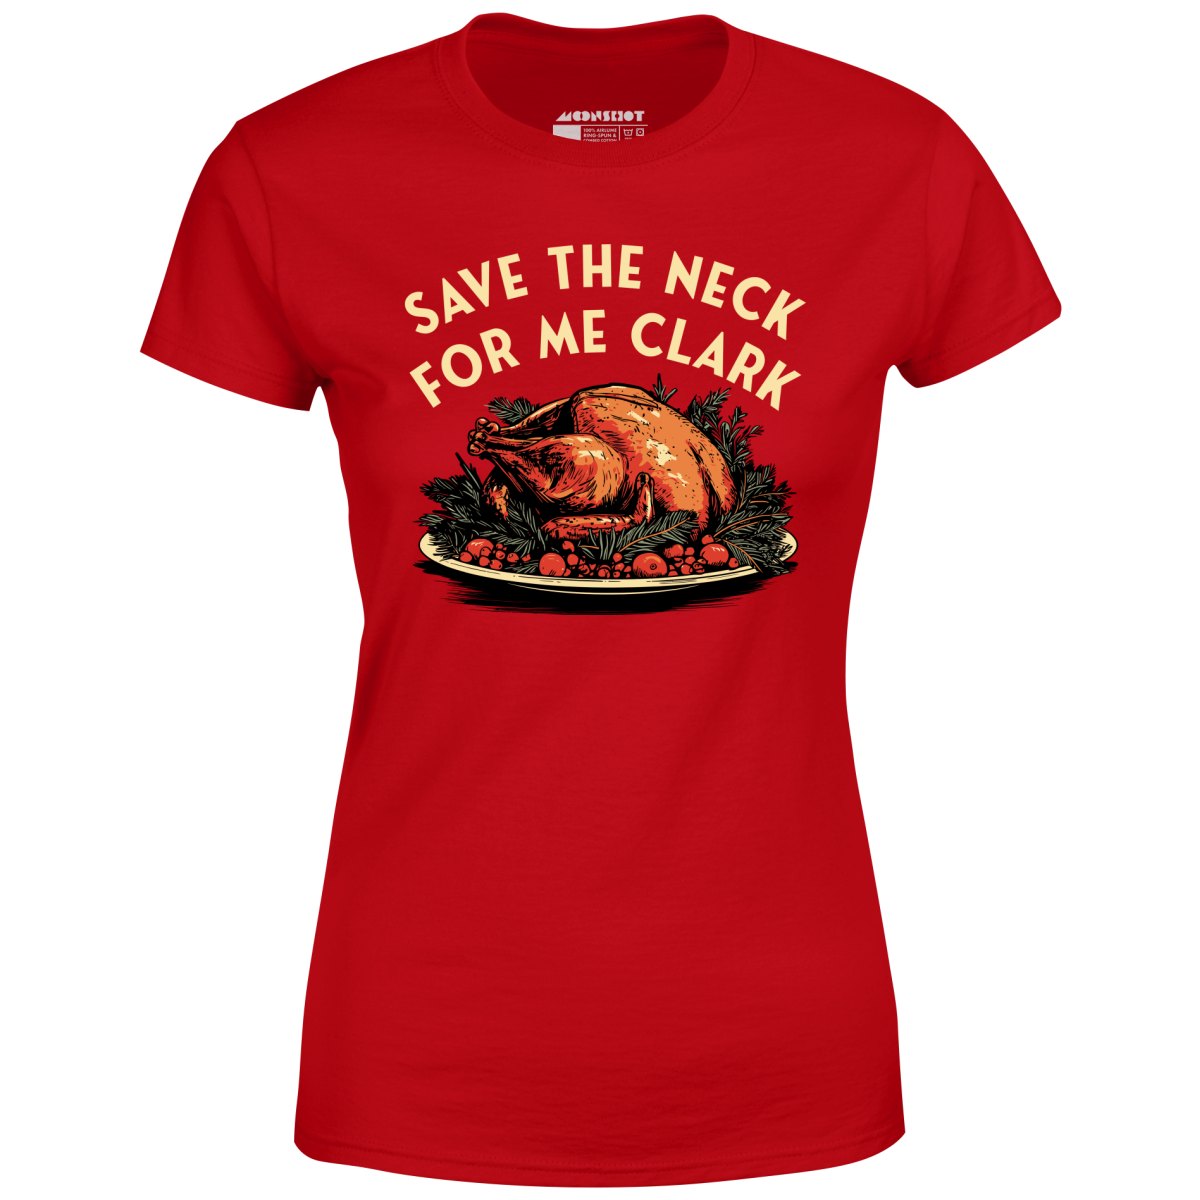 Save the Neck For Me Clark - Women's T-Shirt